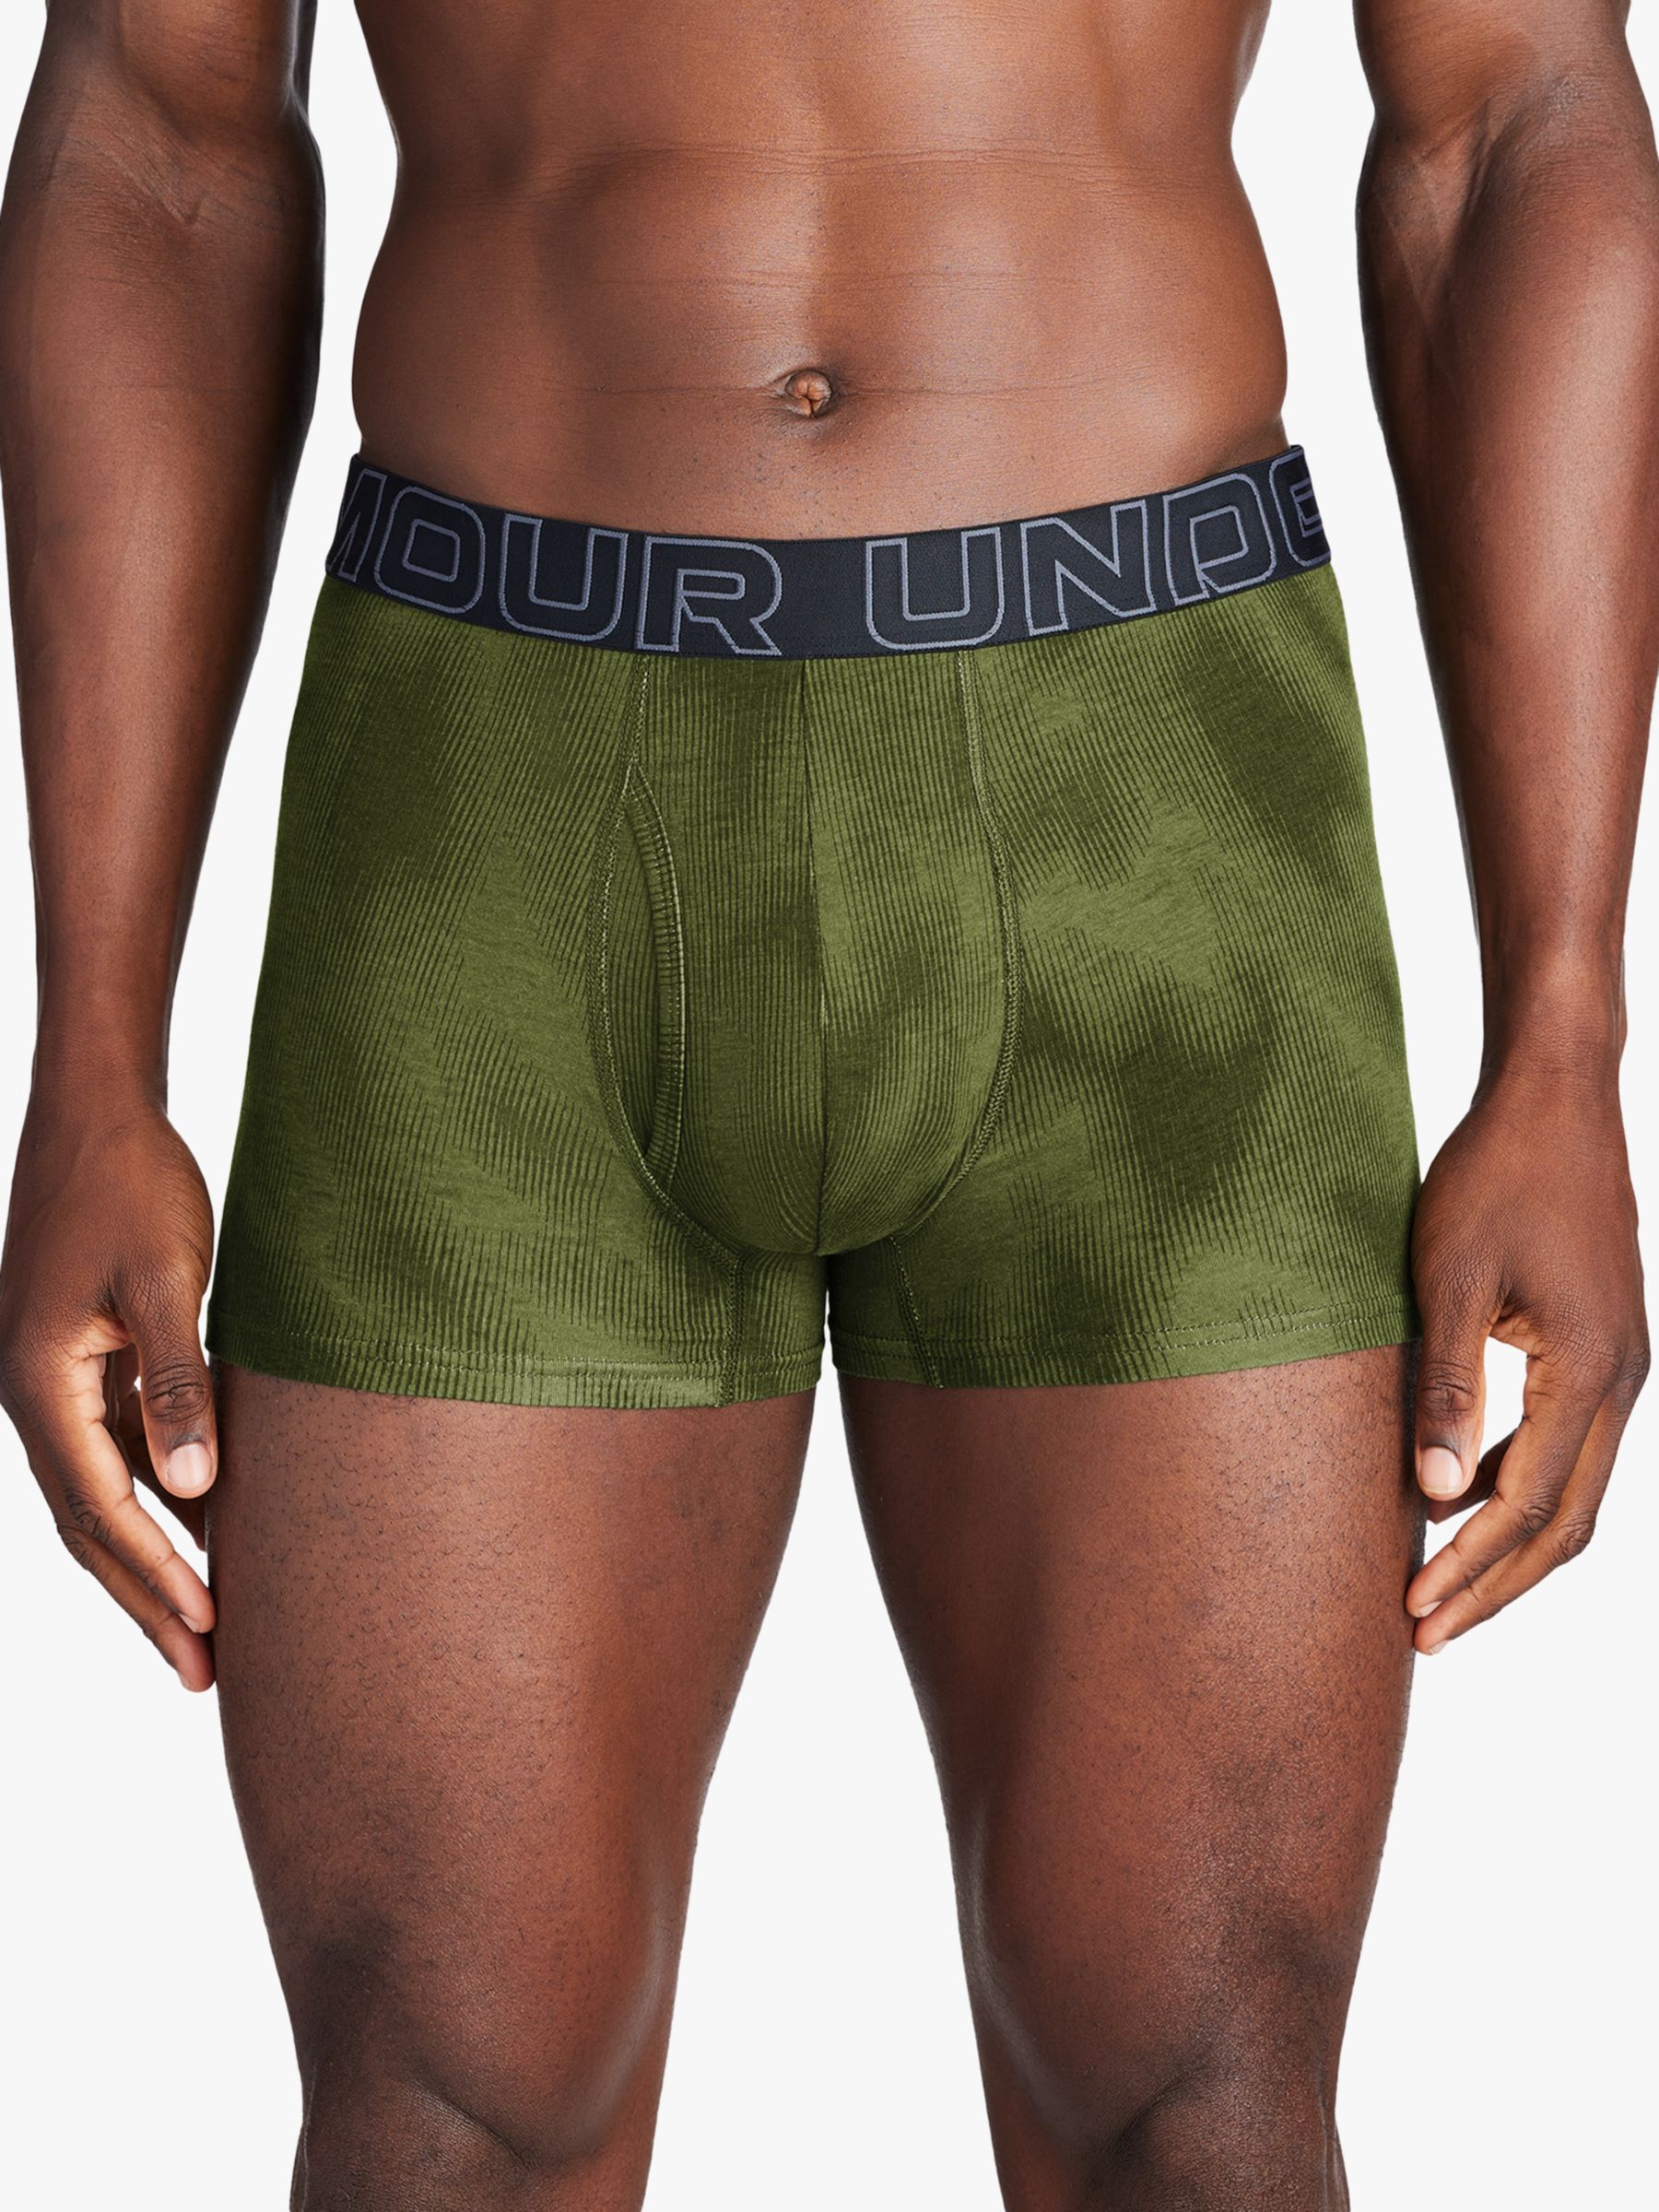 Under Armour Performance Boxers, Pack of 3, Multi, XL